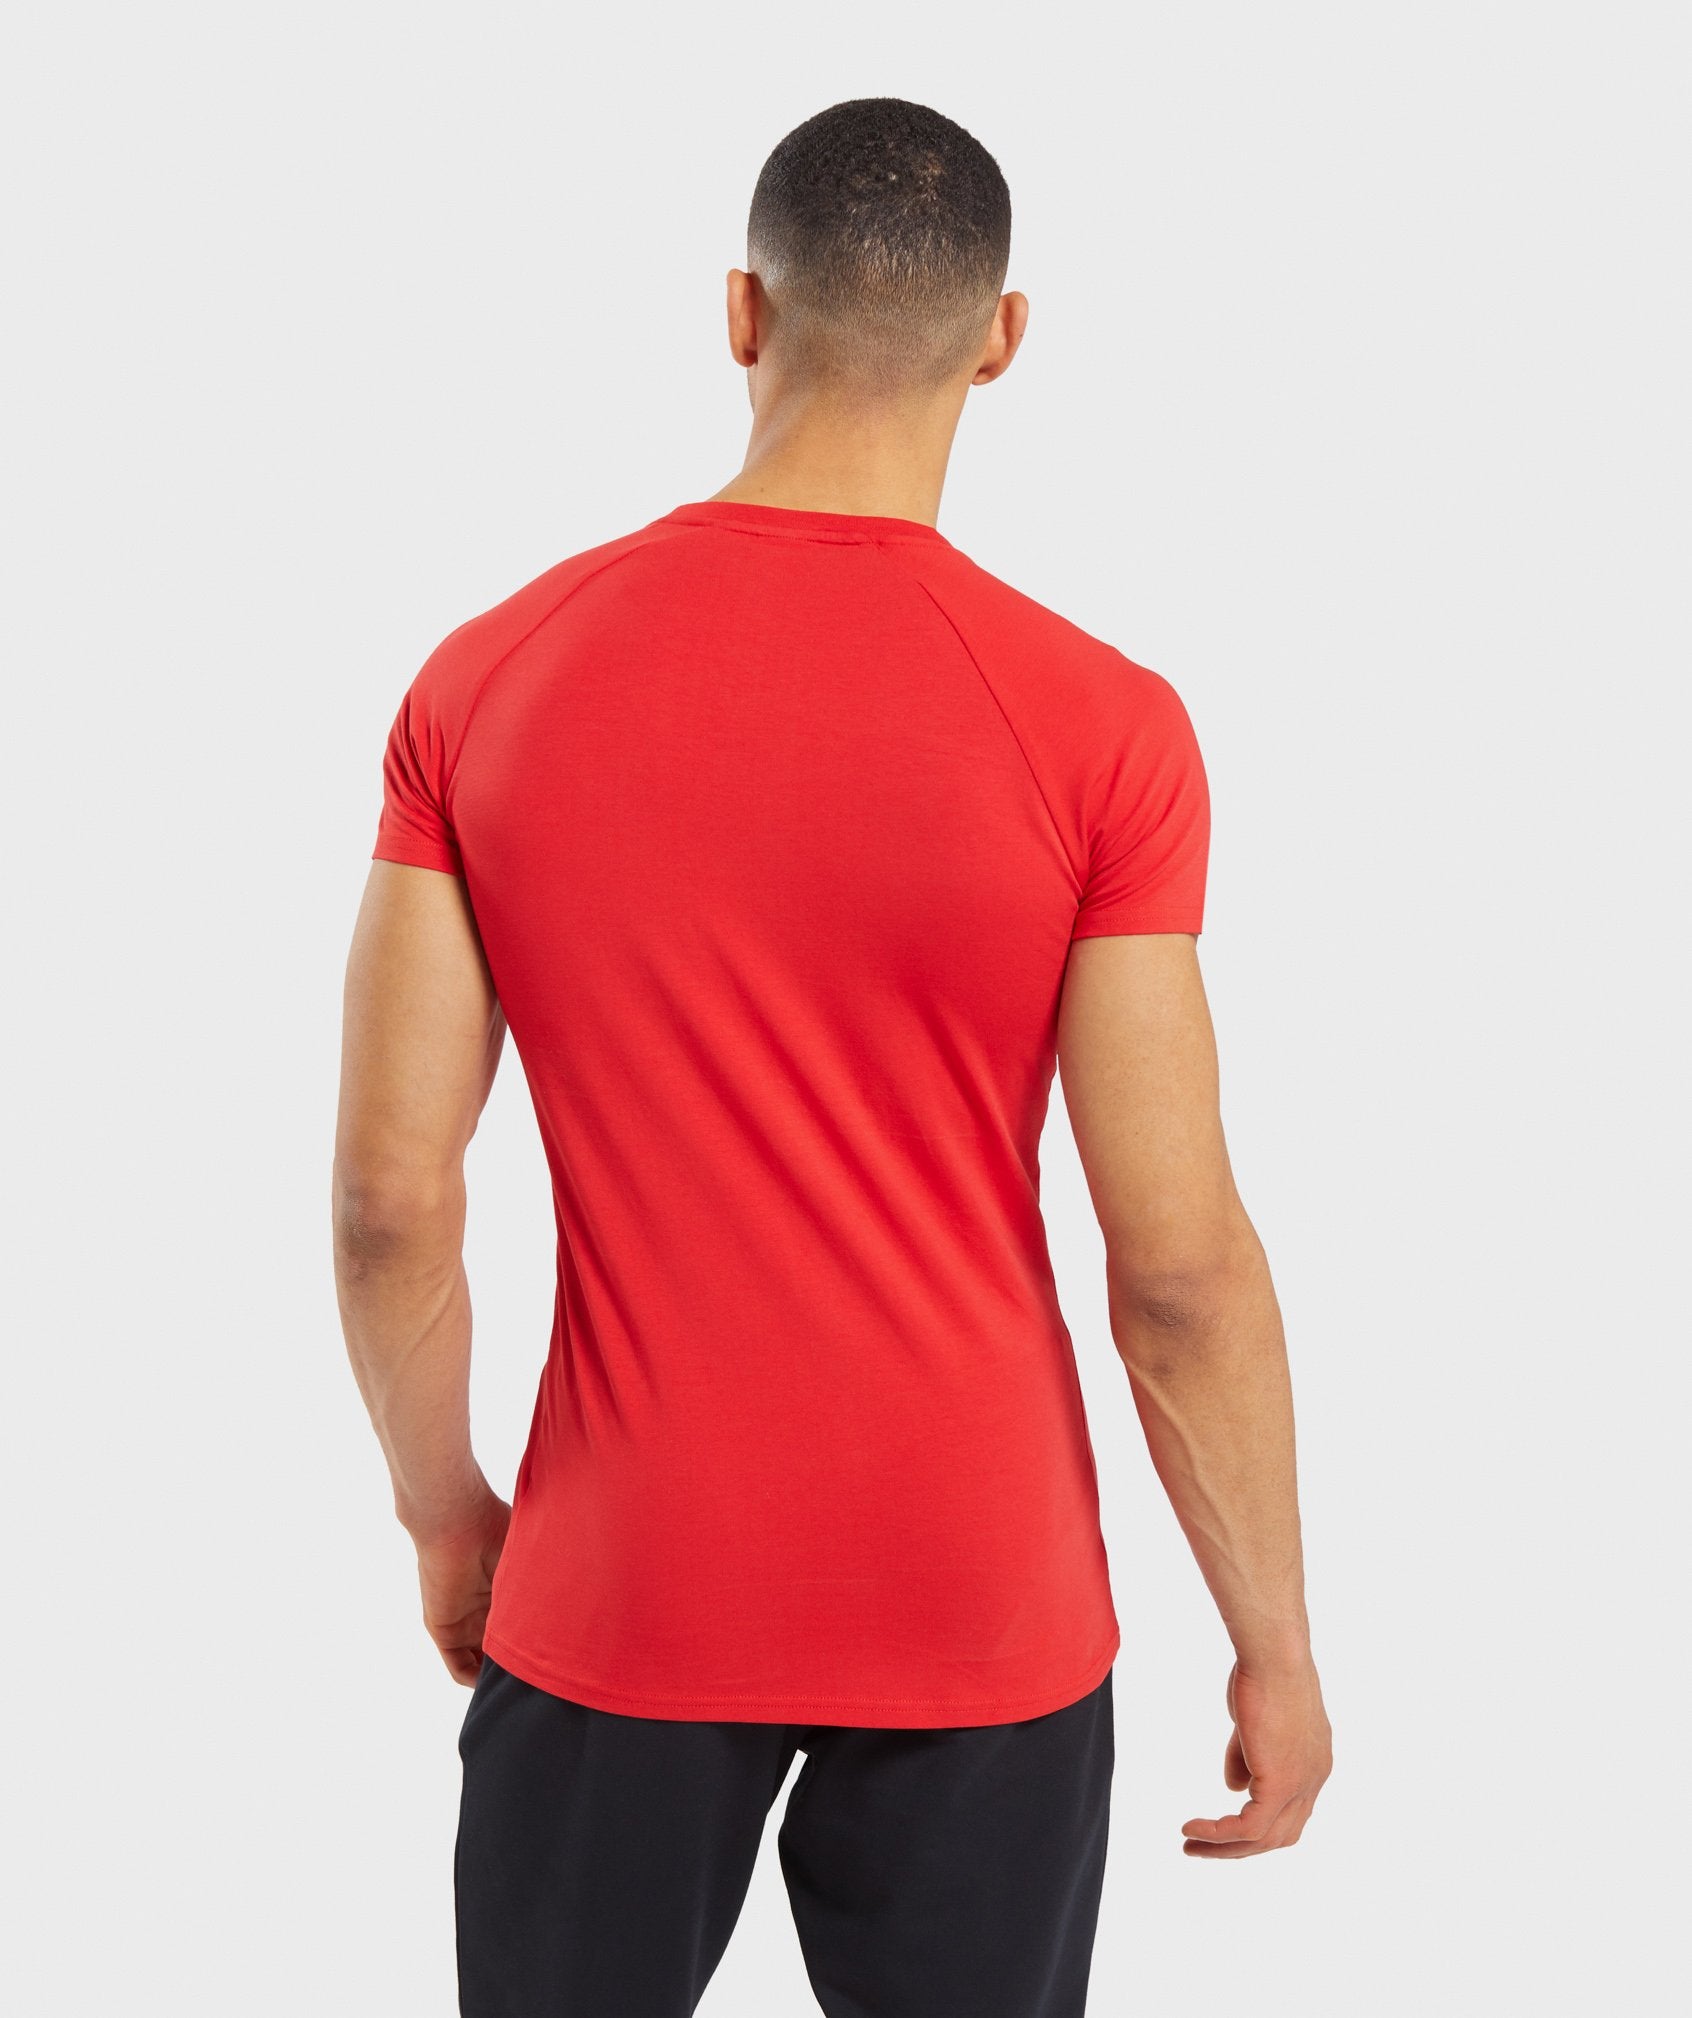 Apollo T-Shirt in Red - view 2